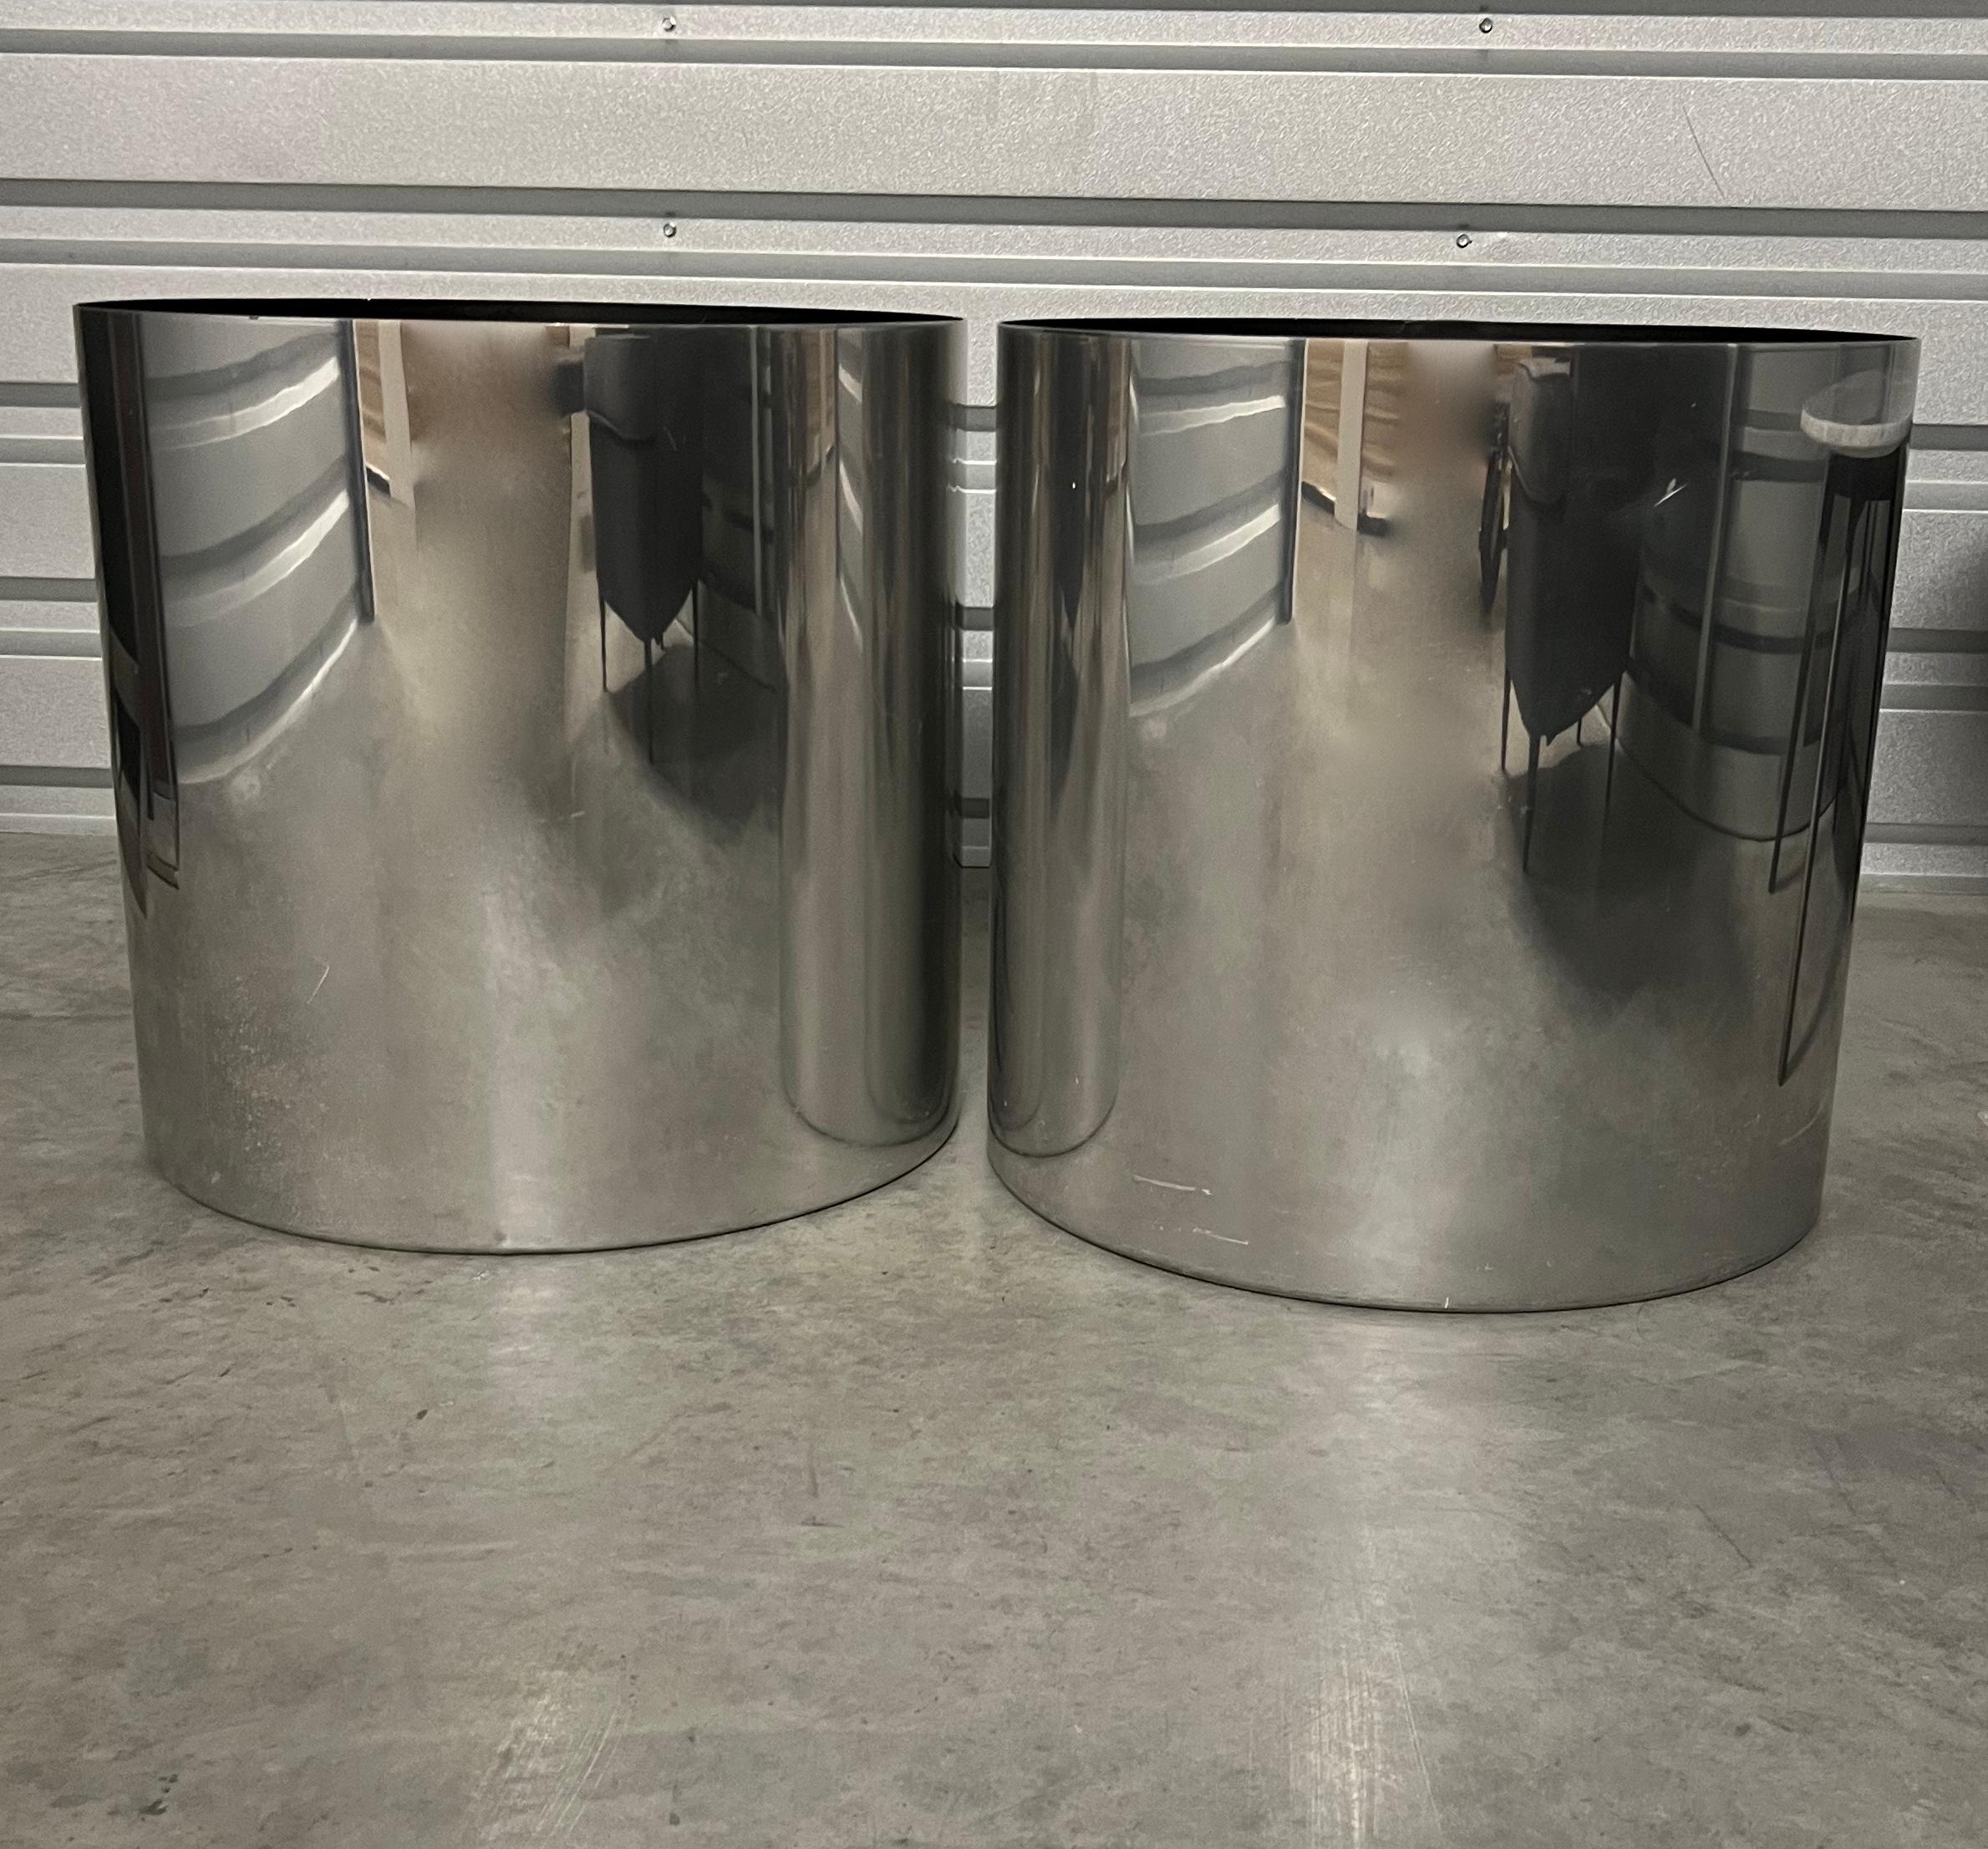 Set of two extra-large 1970's Architectural Supplements Planters designed by Paul Mayan for  International Habitat Architectural Supplements of NYC.  The planters feature a modern minimalist design in a shiny mirrored chrome finish.  These are 

The